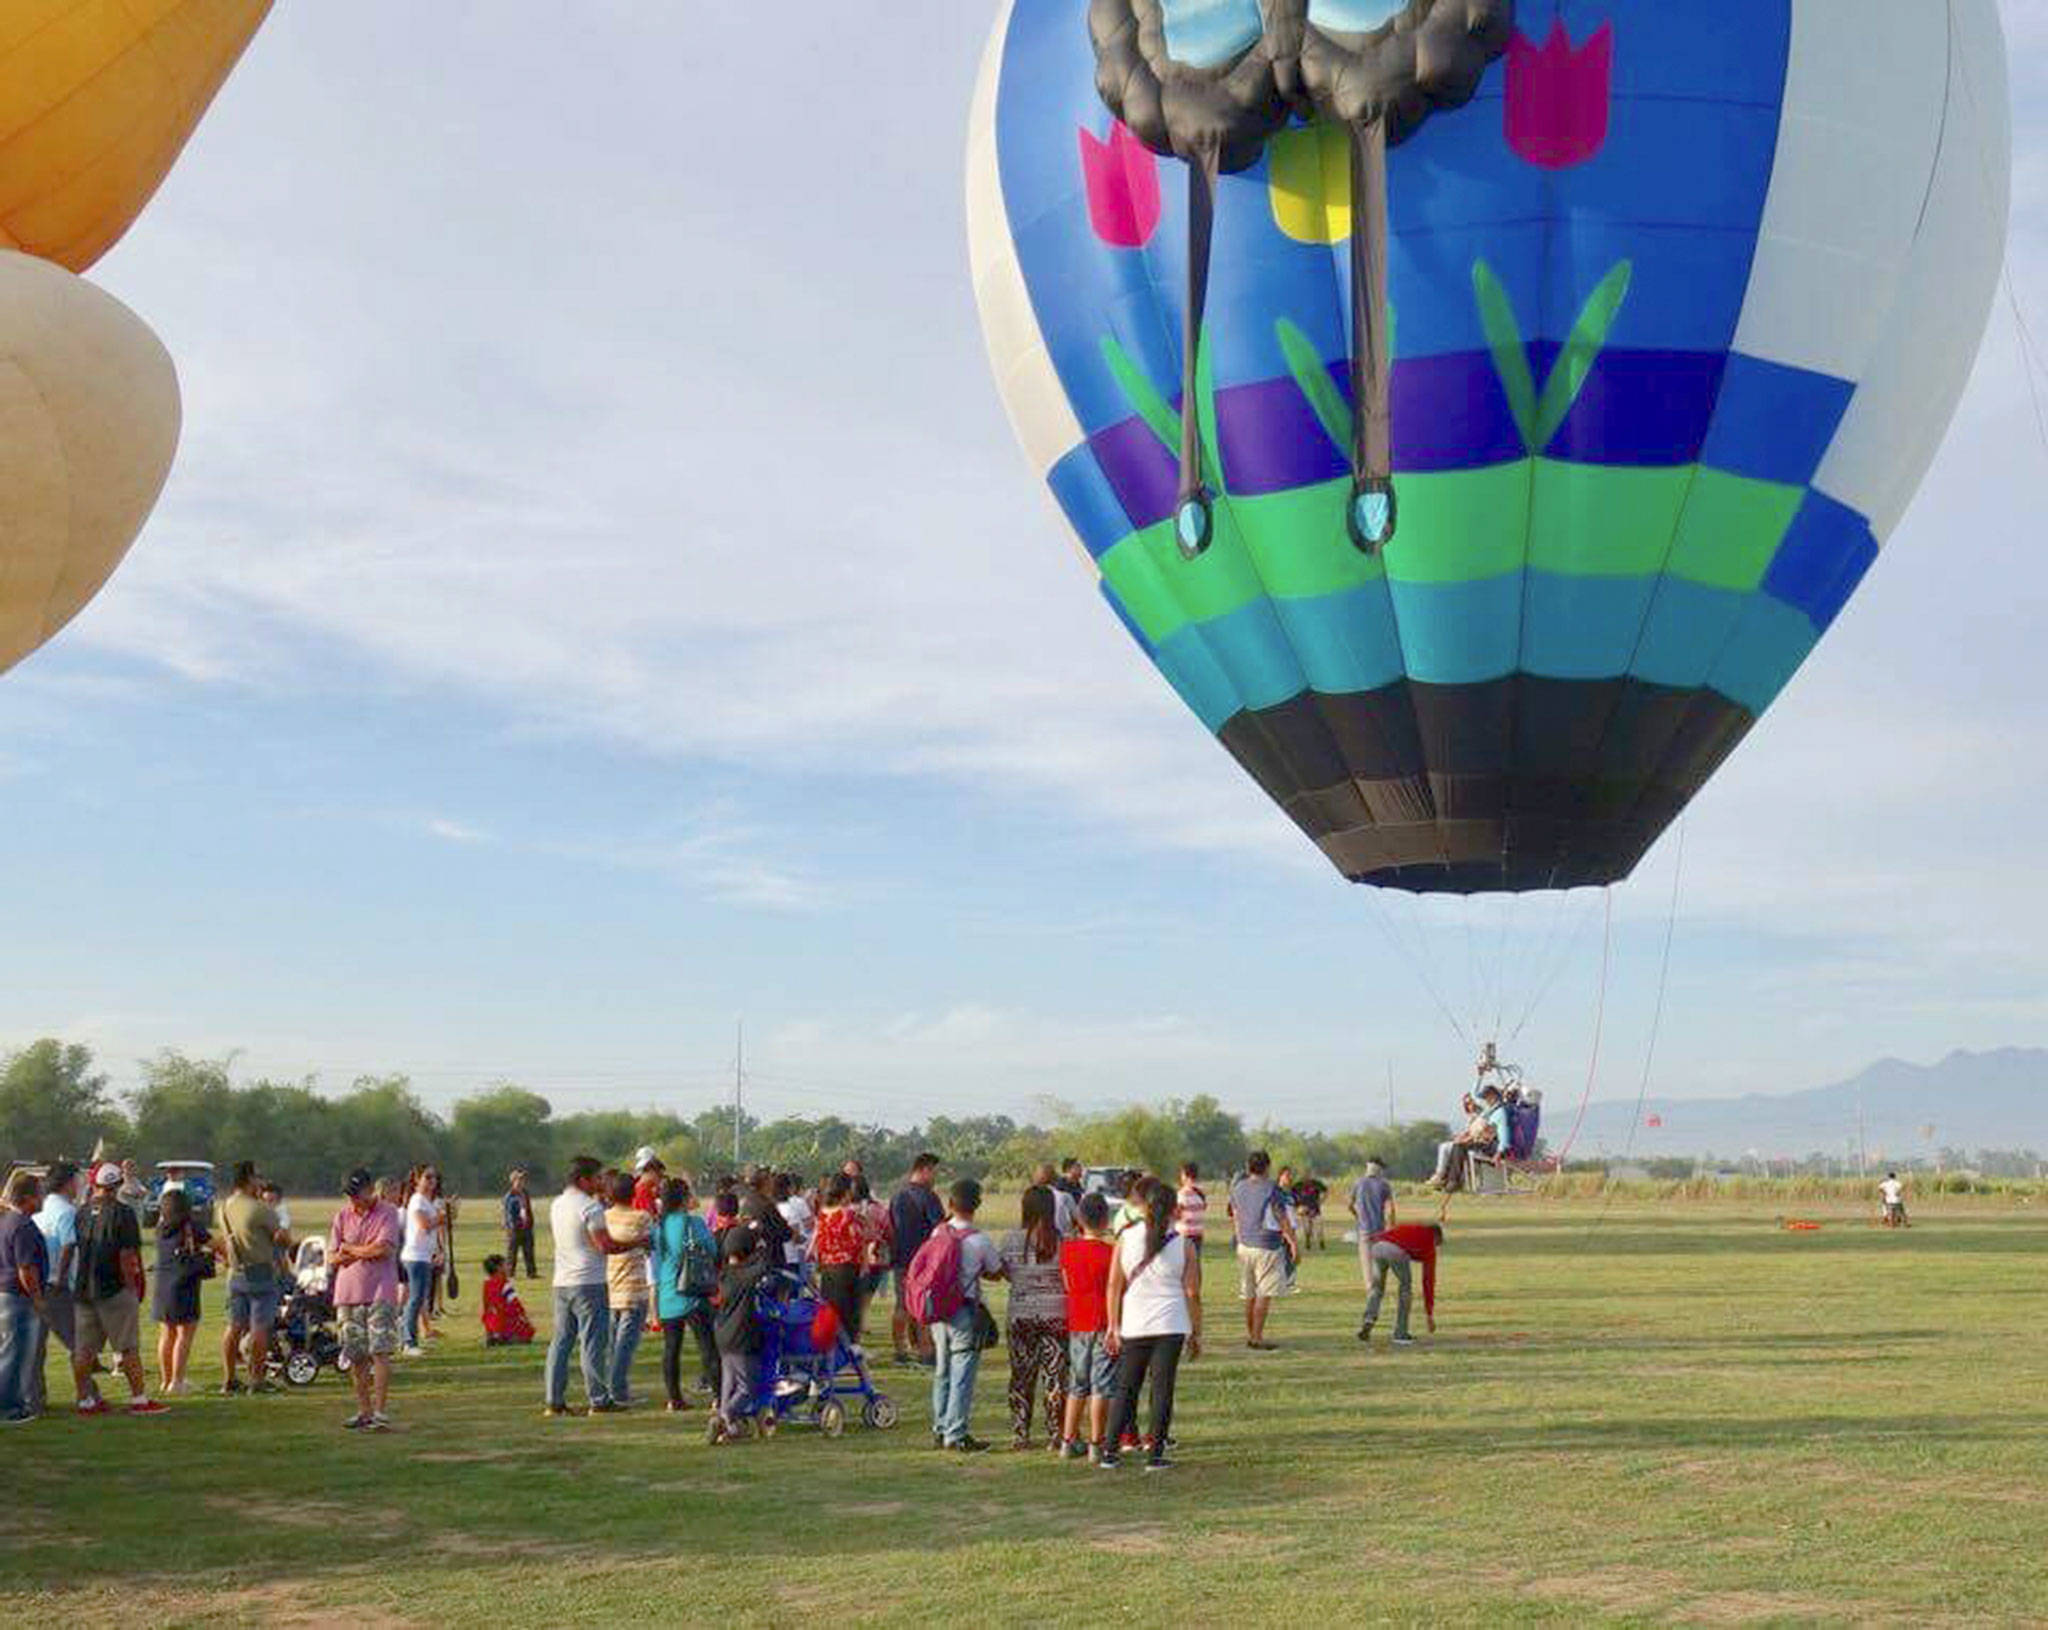 Sequim viewers can watch Captain-Crystal Stout, pilot of the Dream Catcher hot air balloon, fly live around 5 a.m. and 5 p.m. March 22-25 in the Philippines for the Lubao International Balloon and Music Festival at facebook.com/DreamCatcherBalloon. Photo courtesy Captain-Crystal Stout